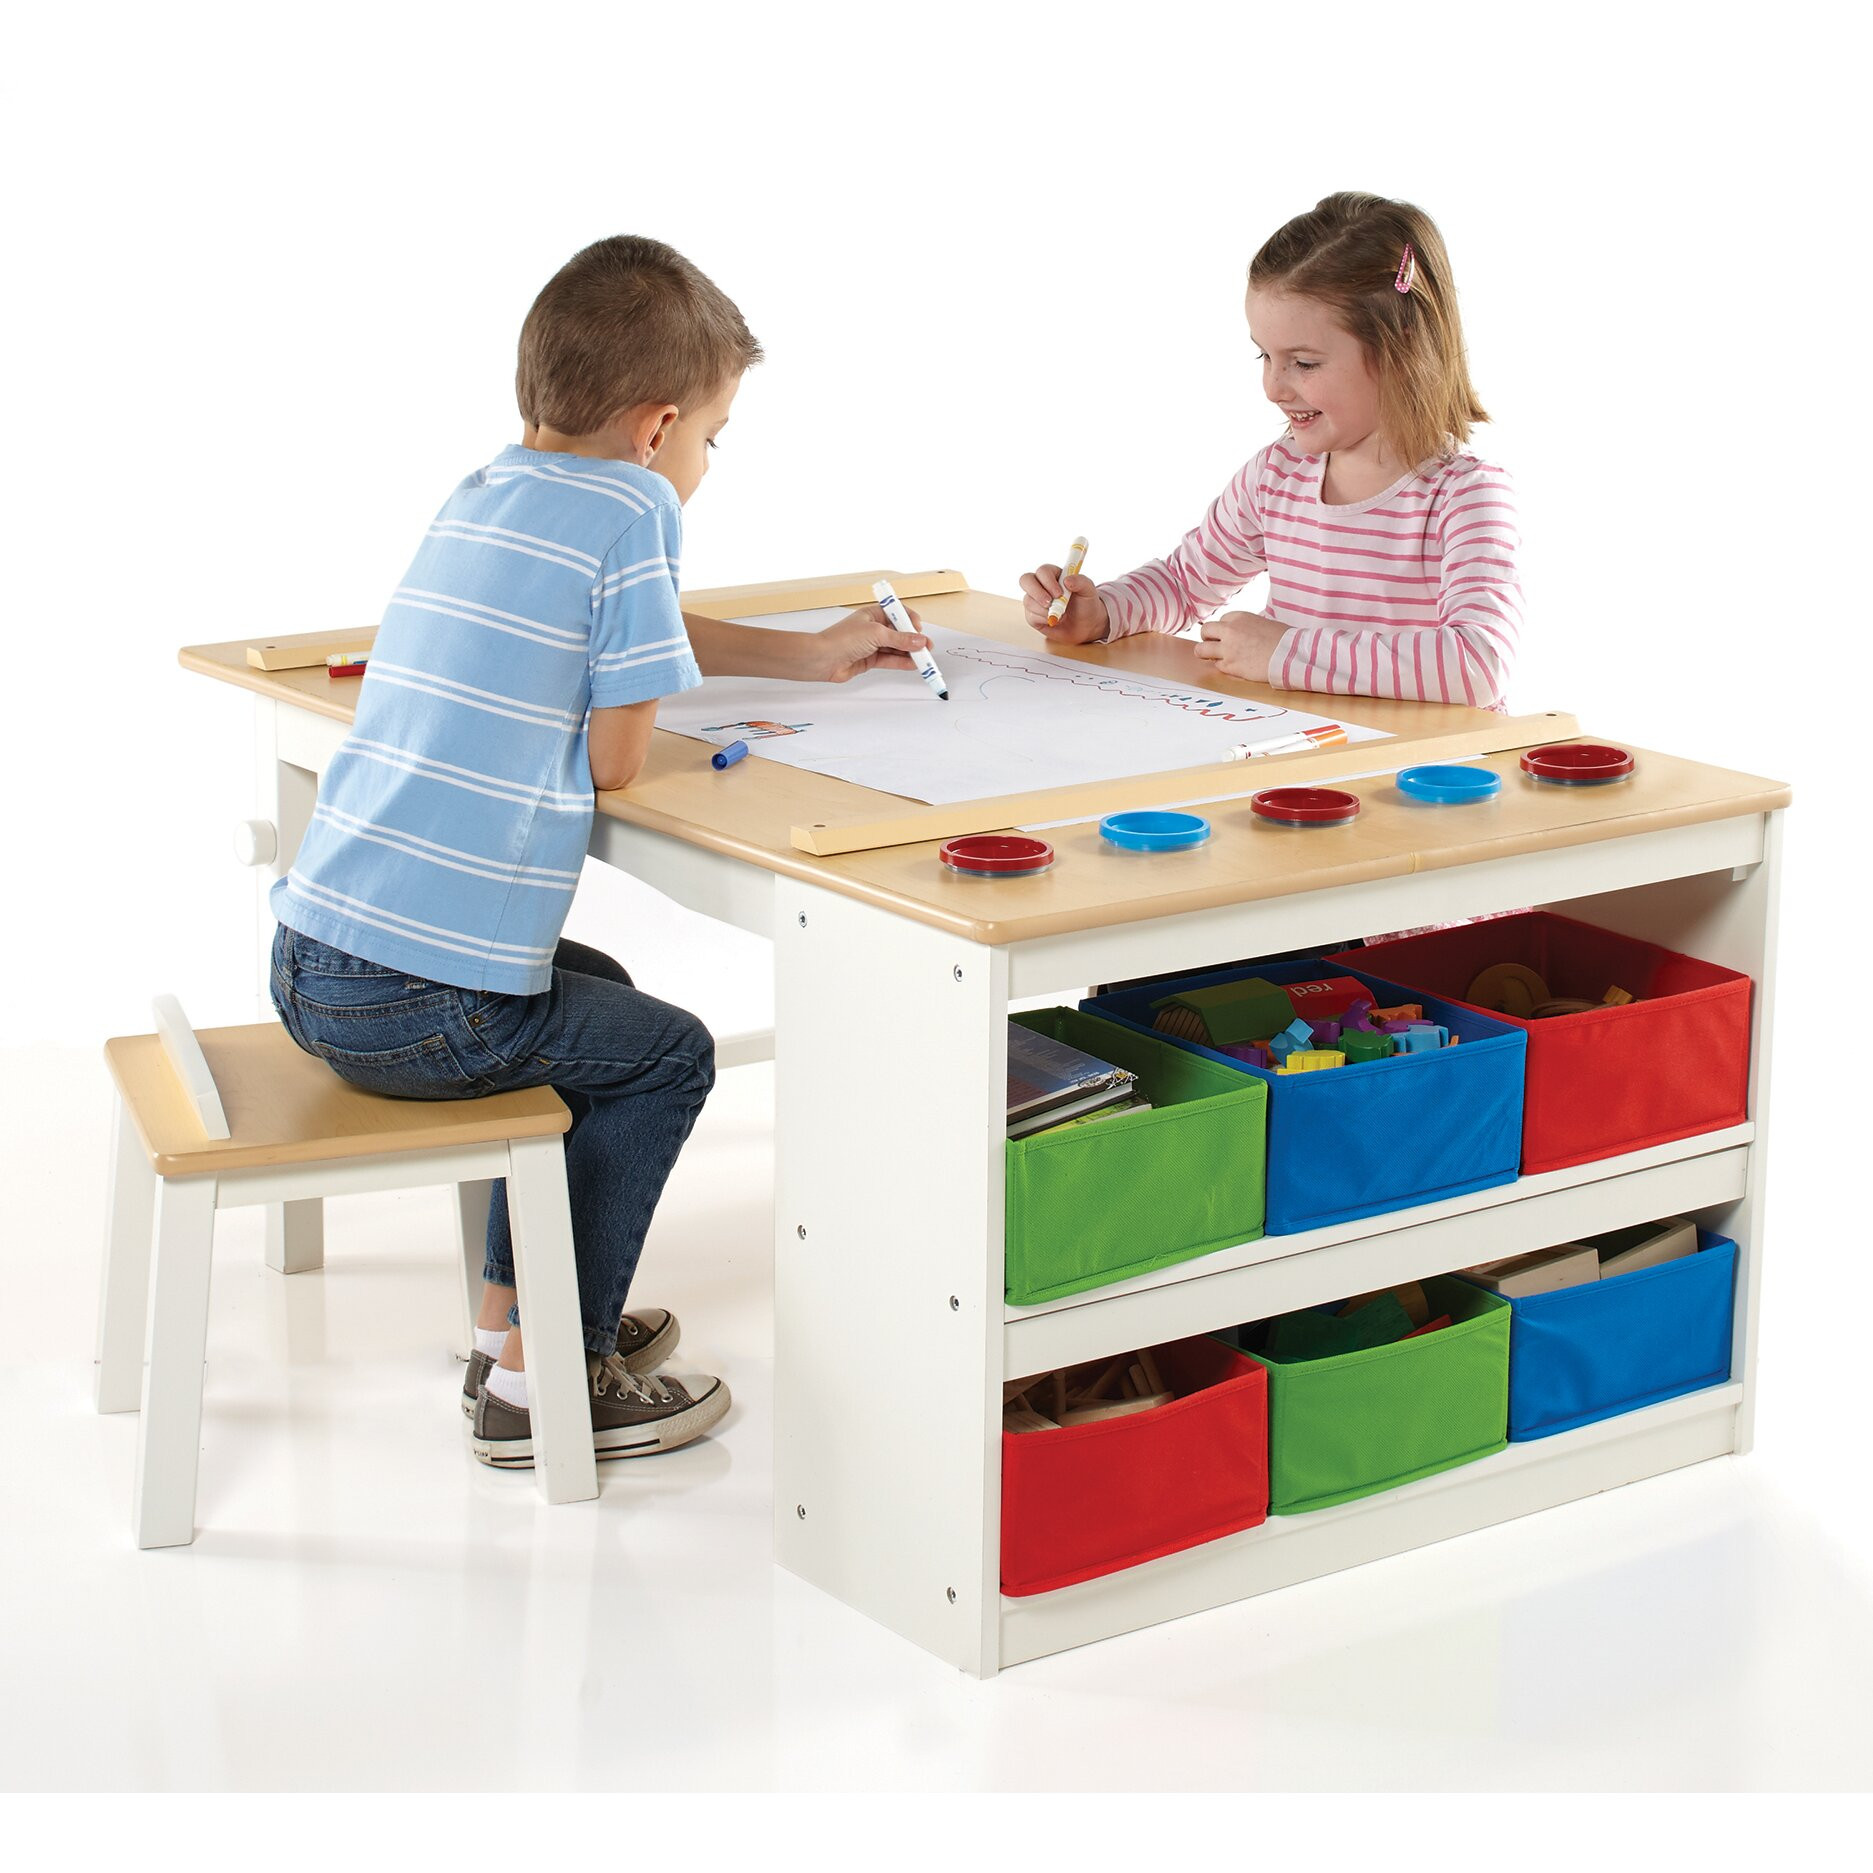 Kids Art And Crafts Table
 Guidecraft Art Kids Arts and Crafts Center Table & Reviews